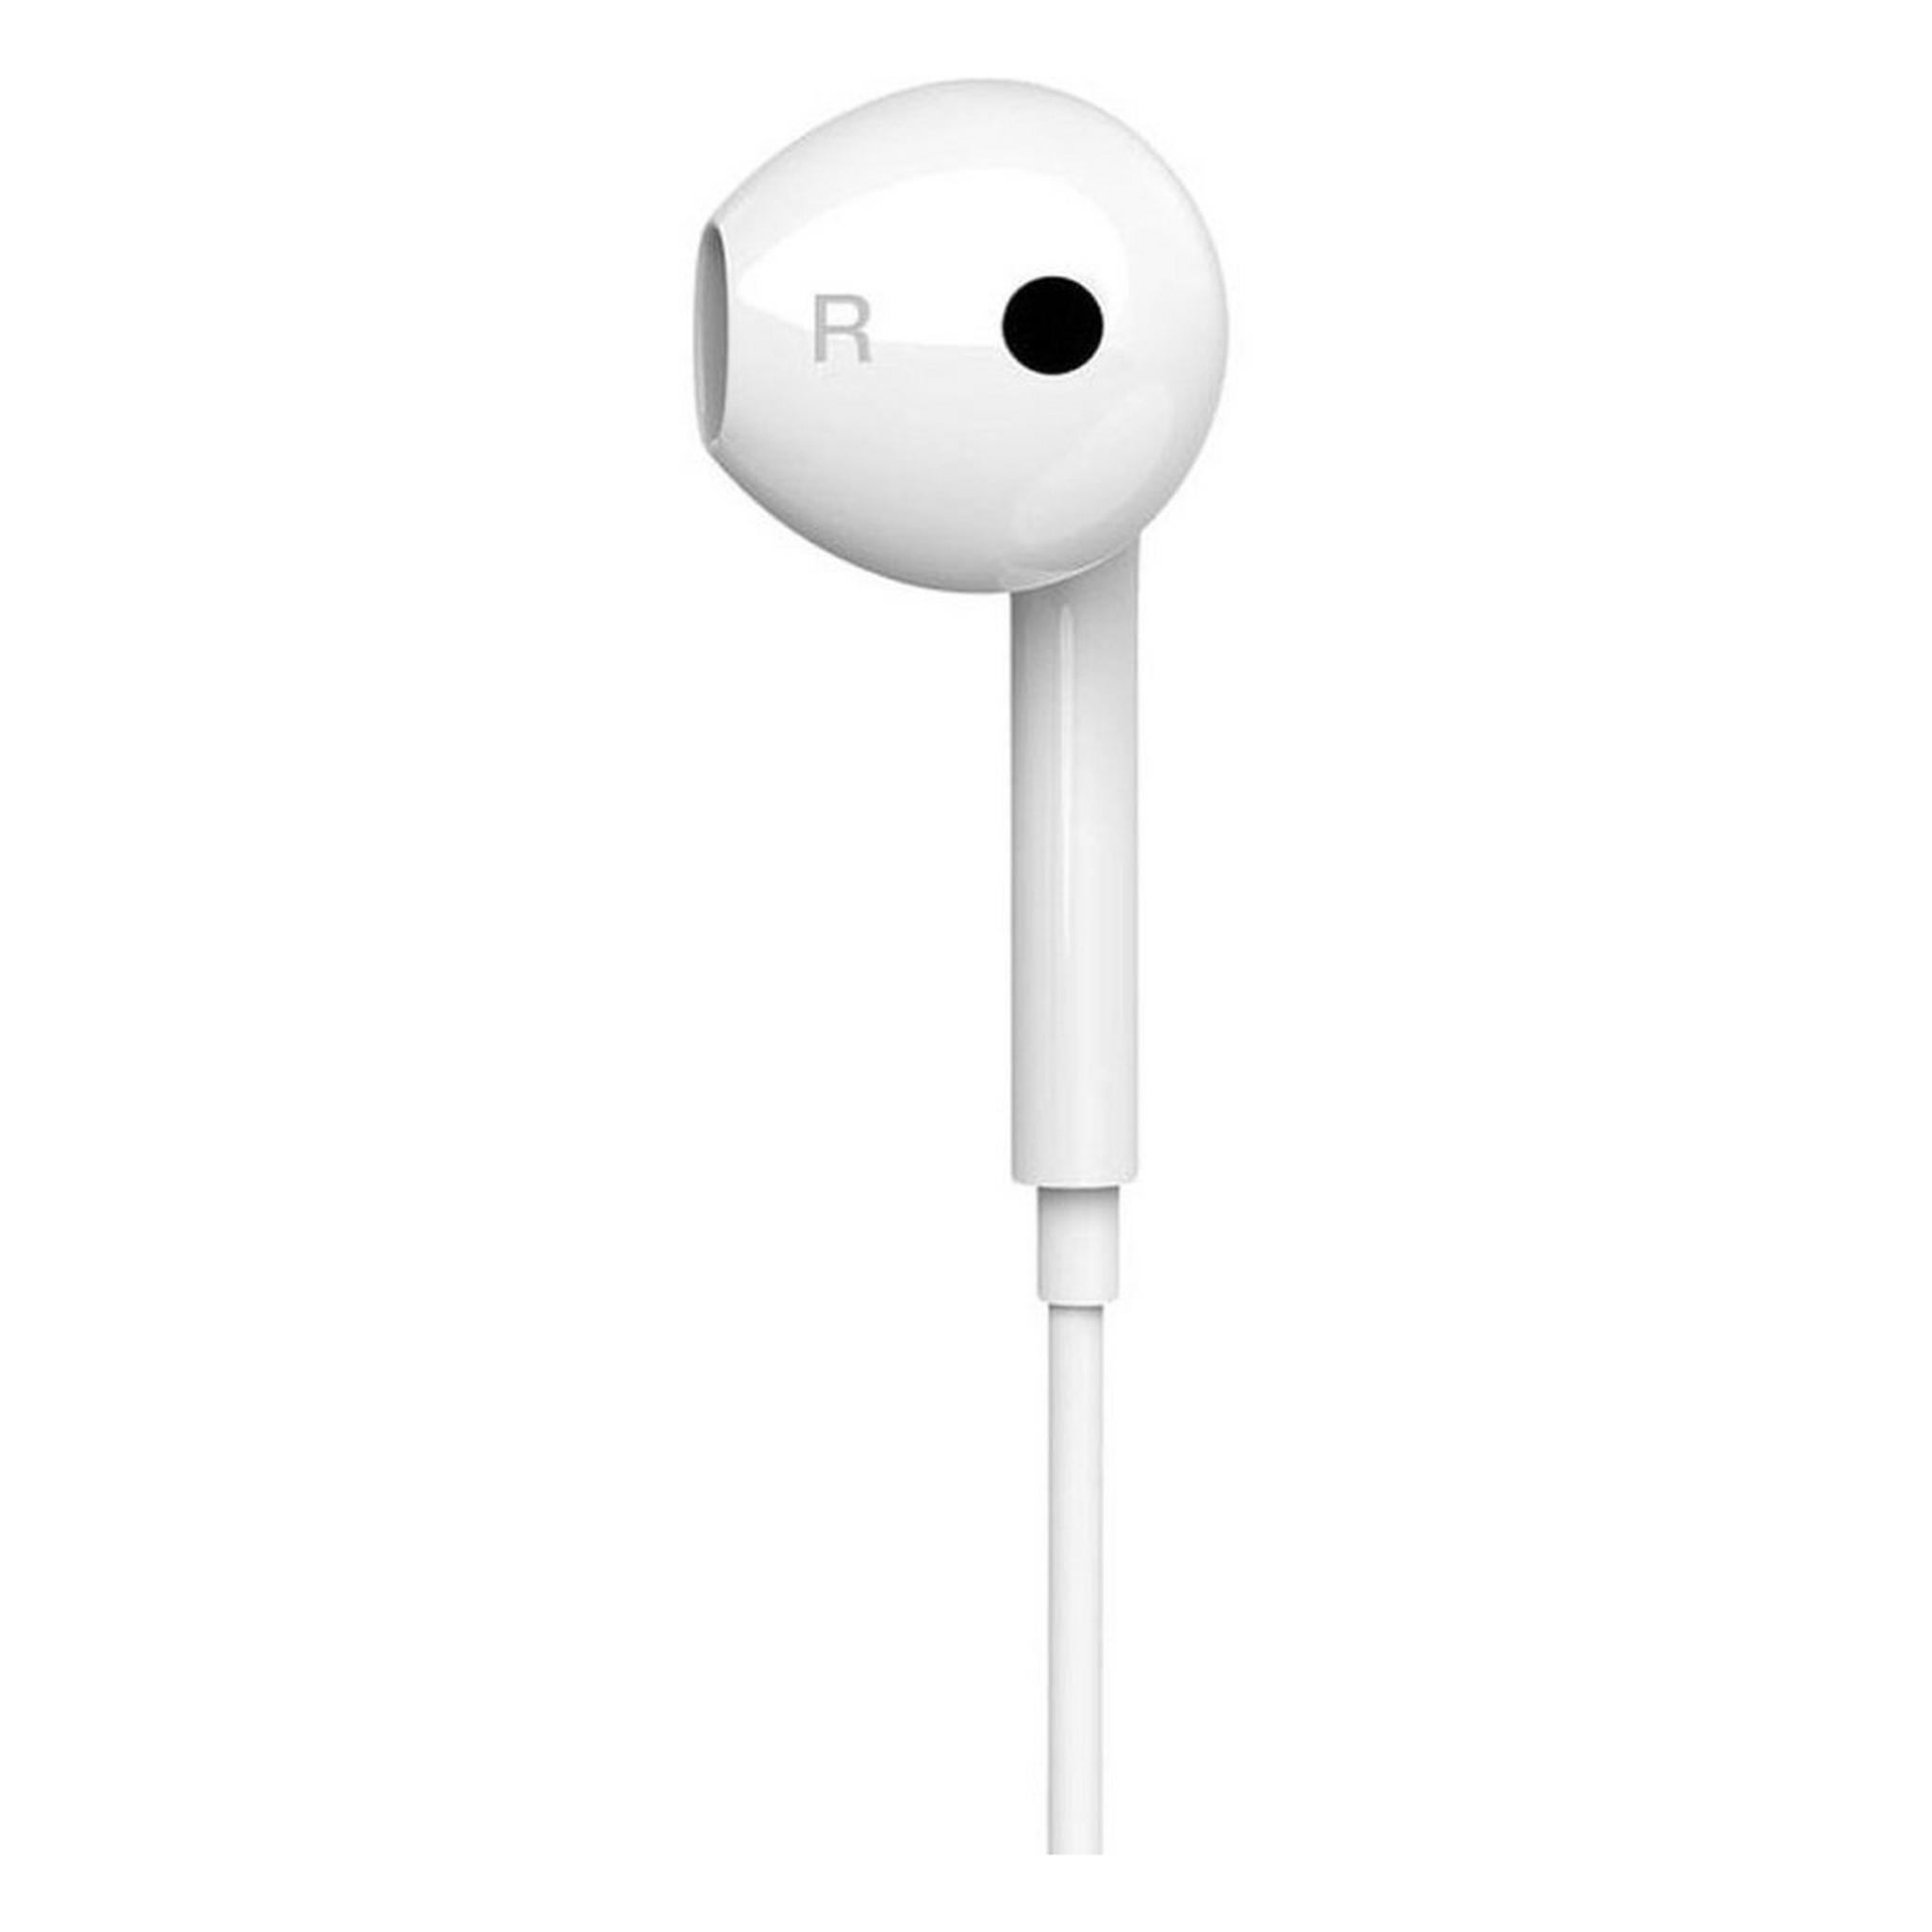 UNISYNK In-Ear USB-C Mono Wired Headphones, 10434 - White